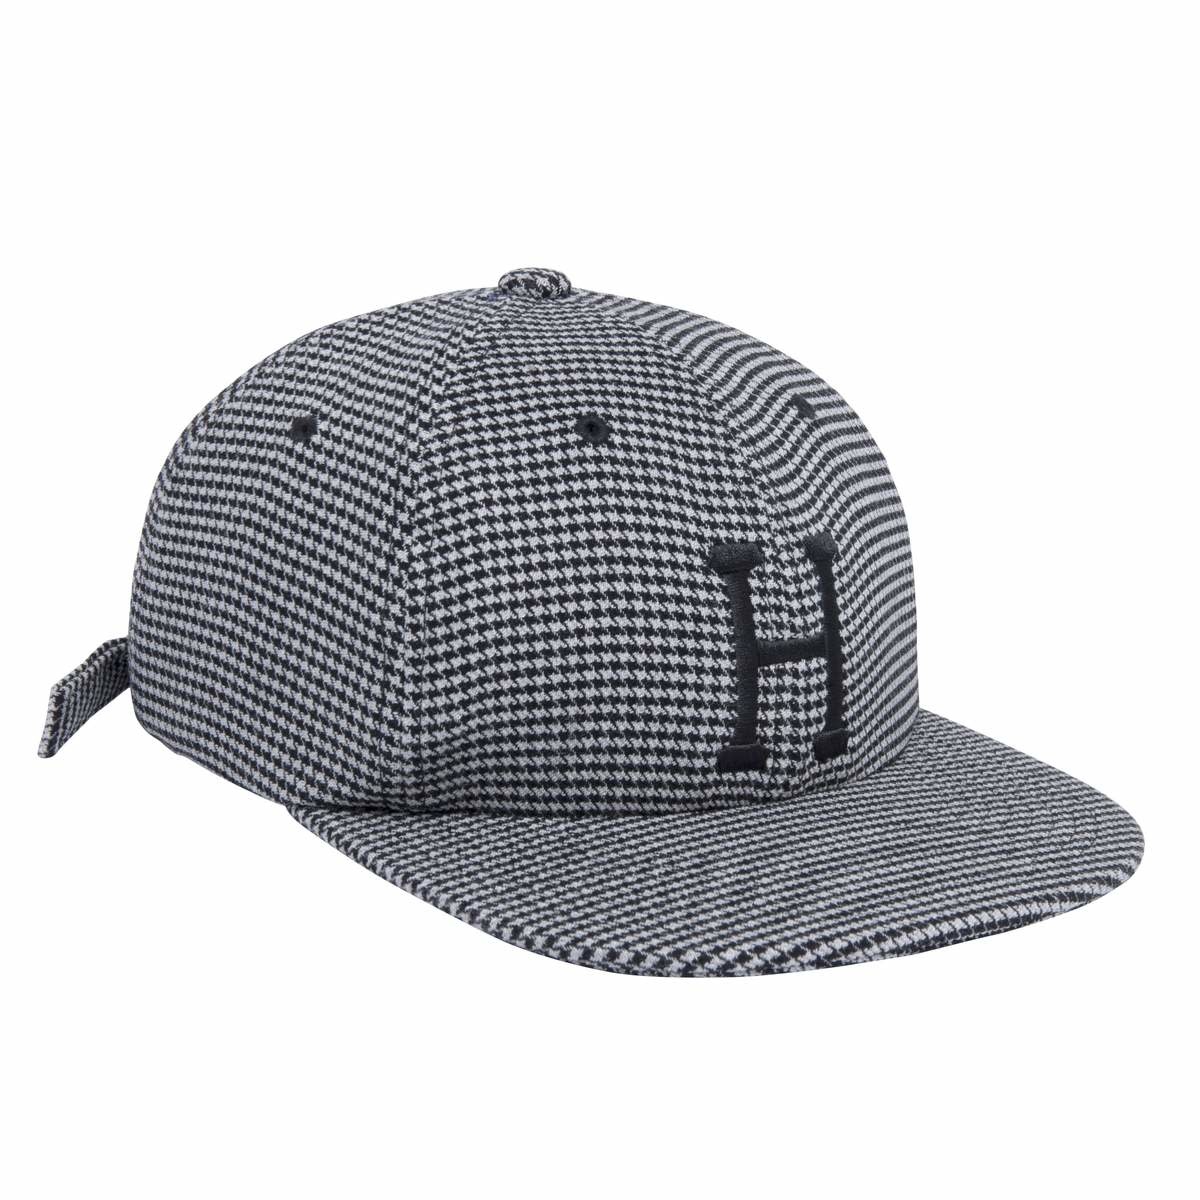 HUF Classic H Houndstooth 6 Panel Black